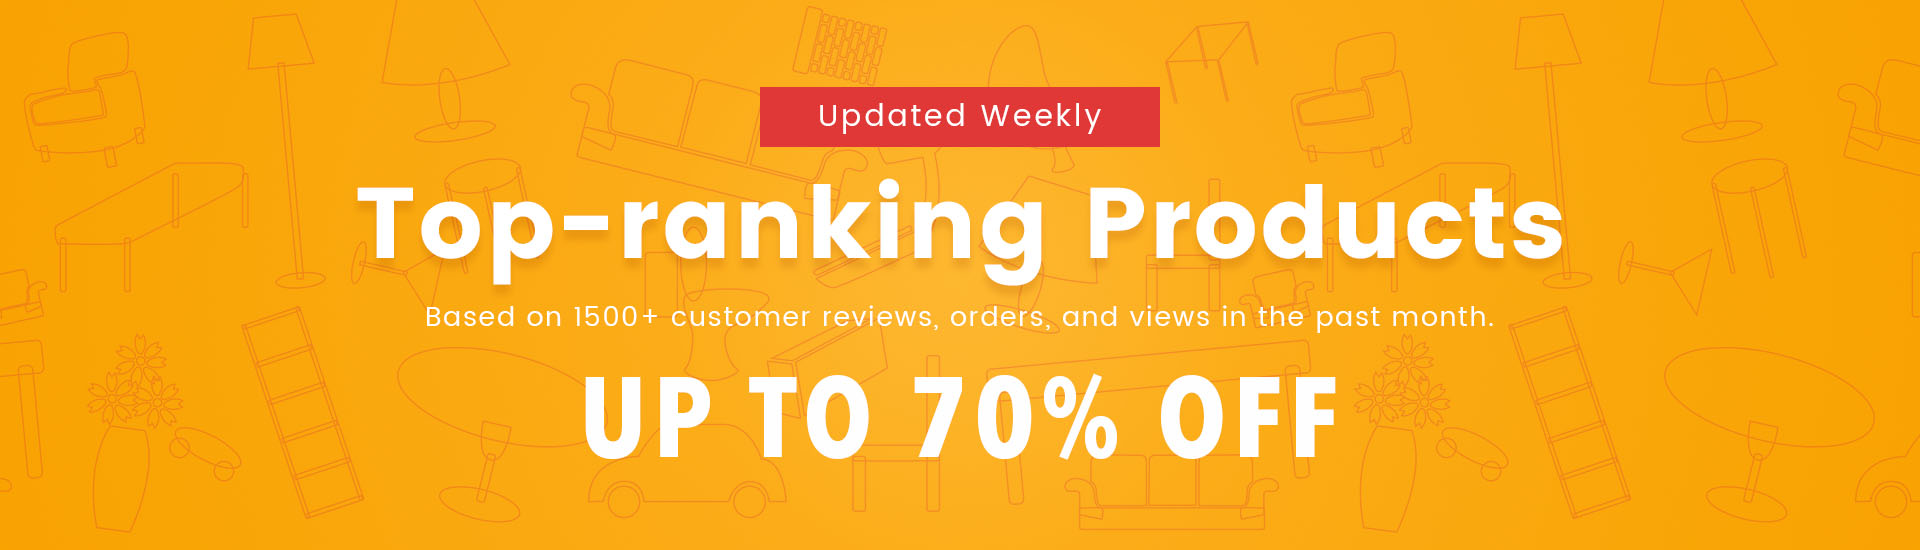 Top-ranking Products